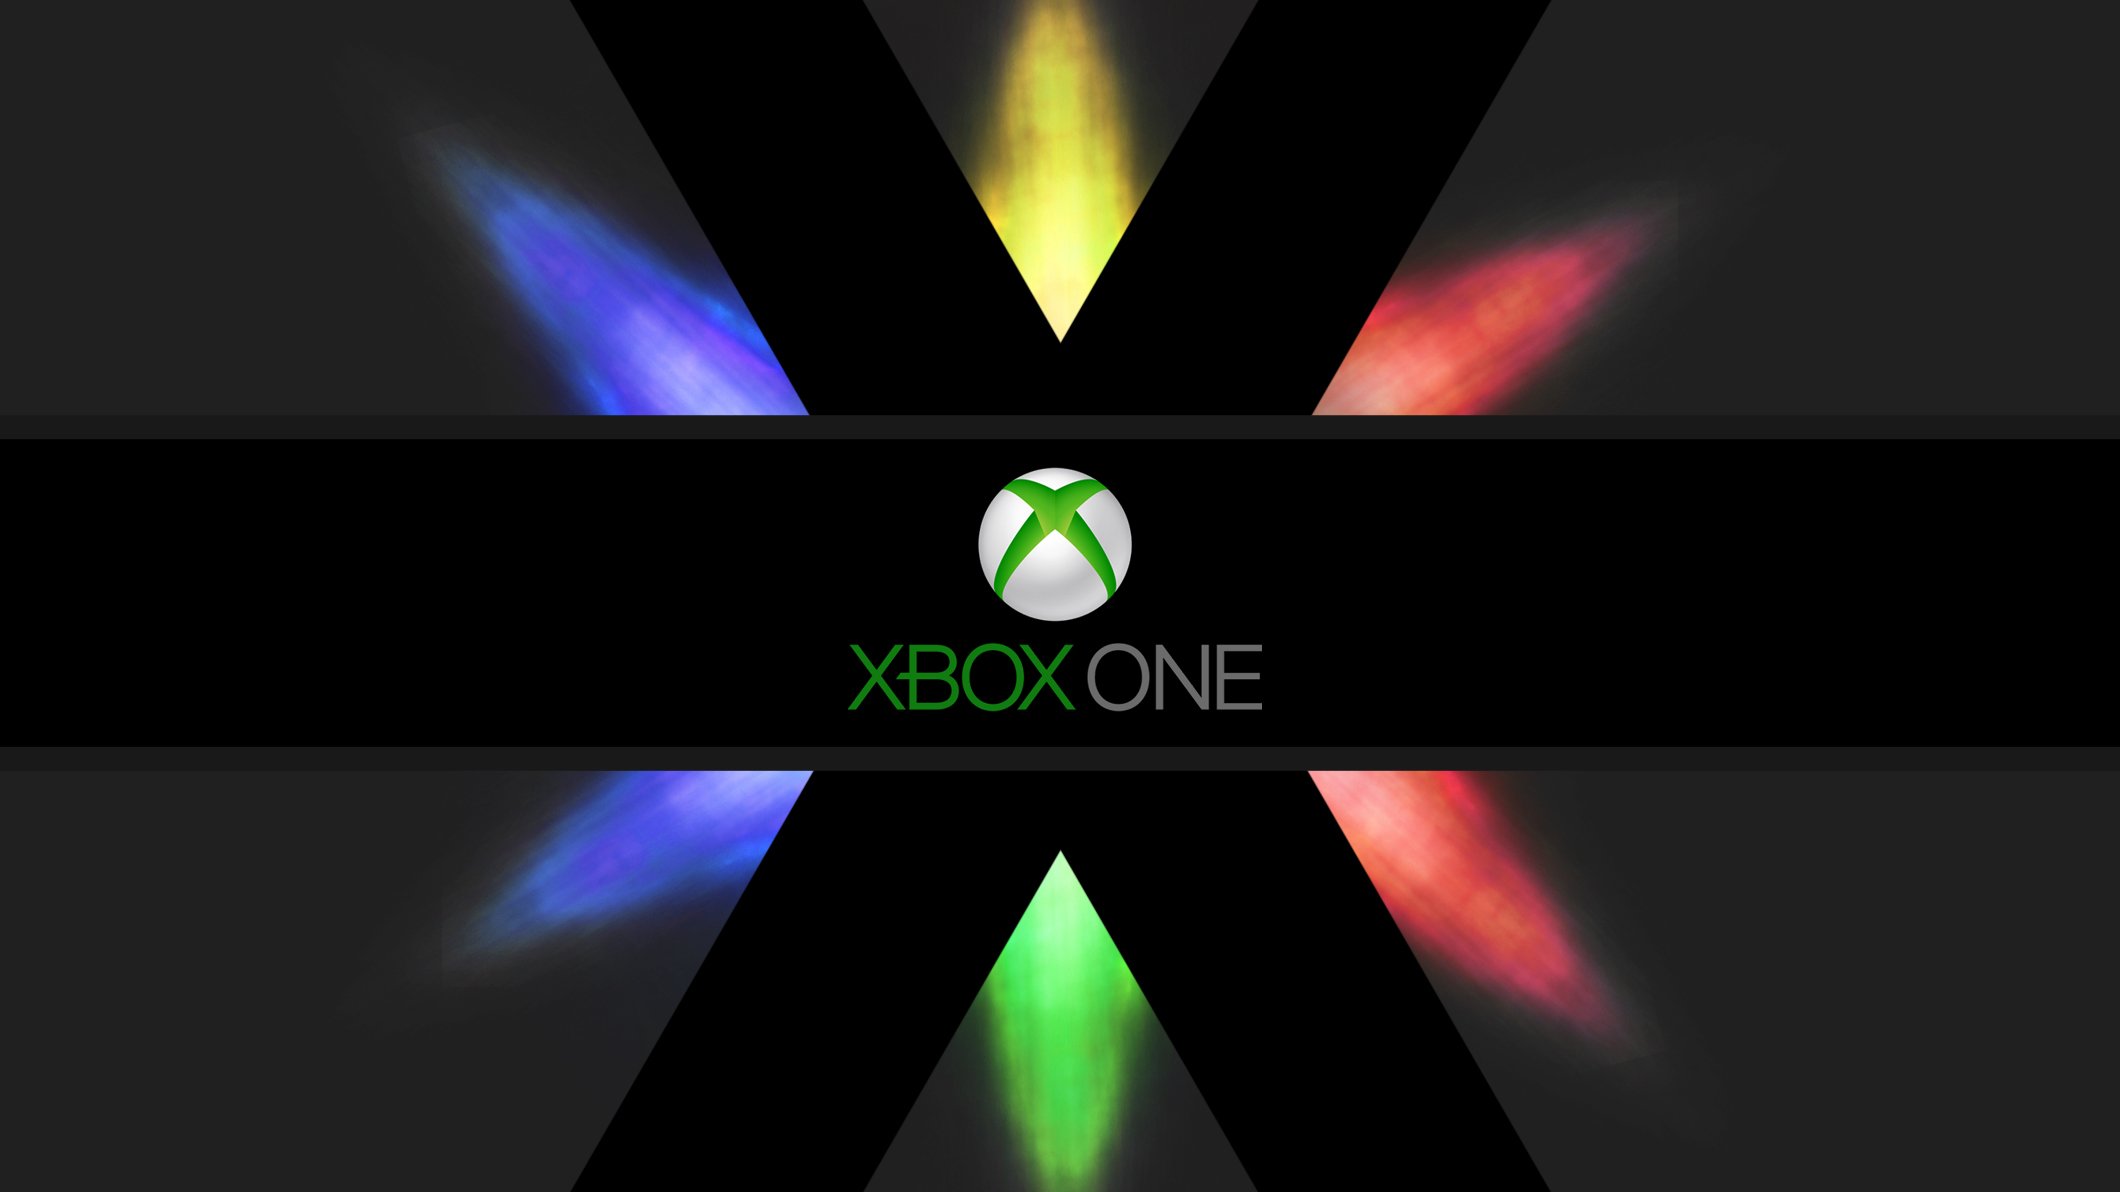 Cool Wallpaper For Xbox One